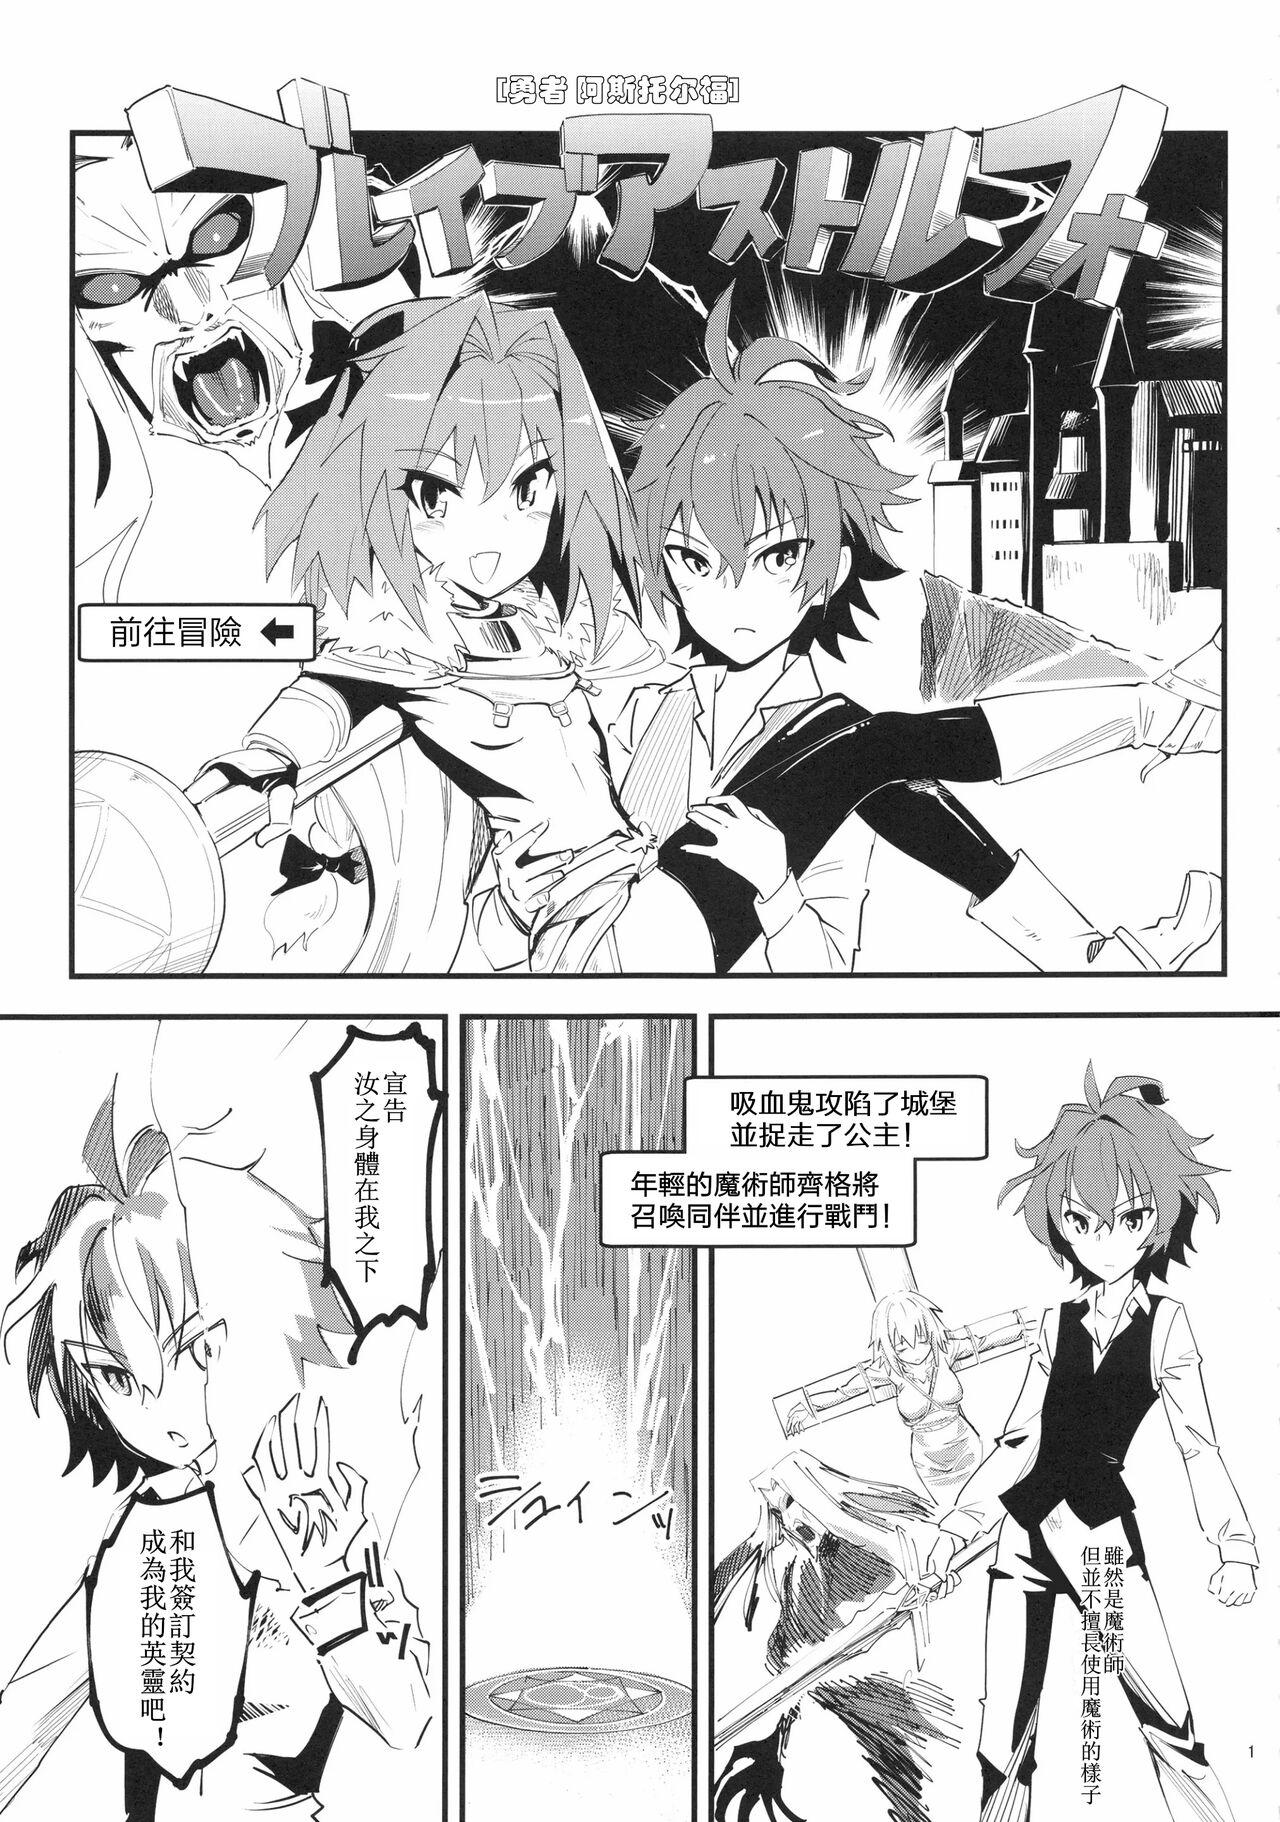 Softcore CLASS CHANGE!! Brave Astolfo - Fate apocrypha Celeb - Page 3